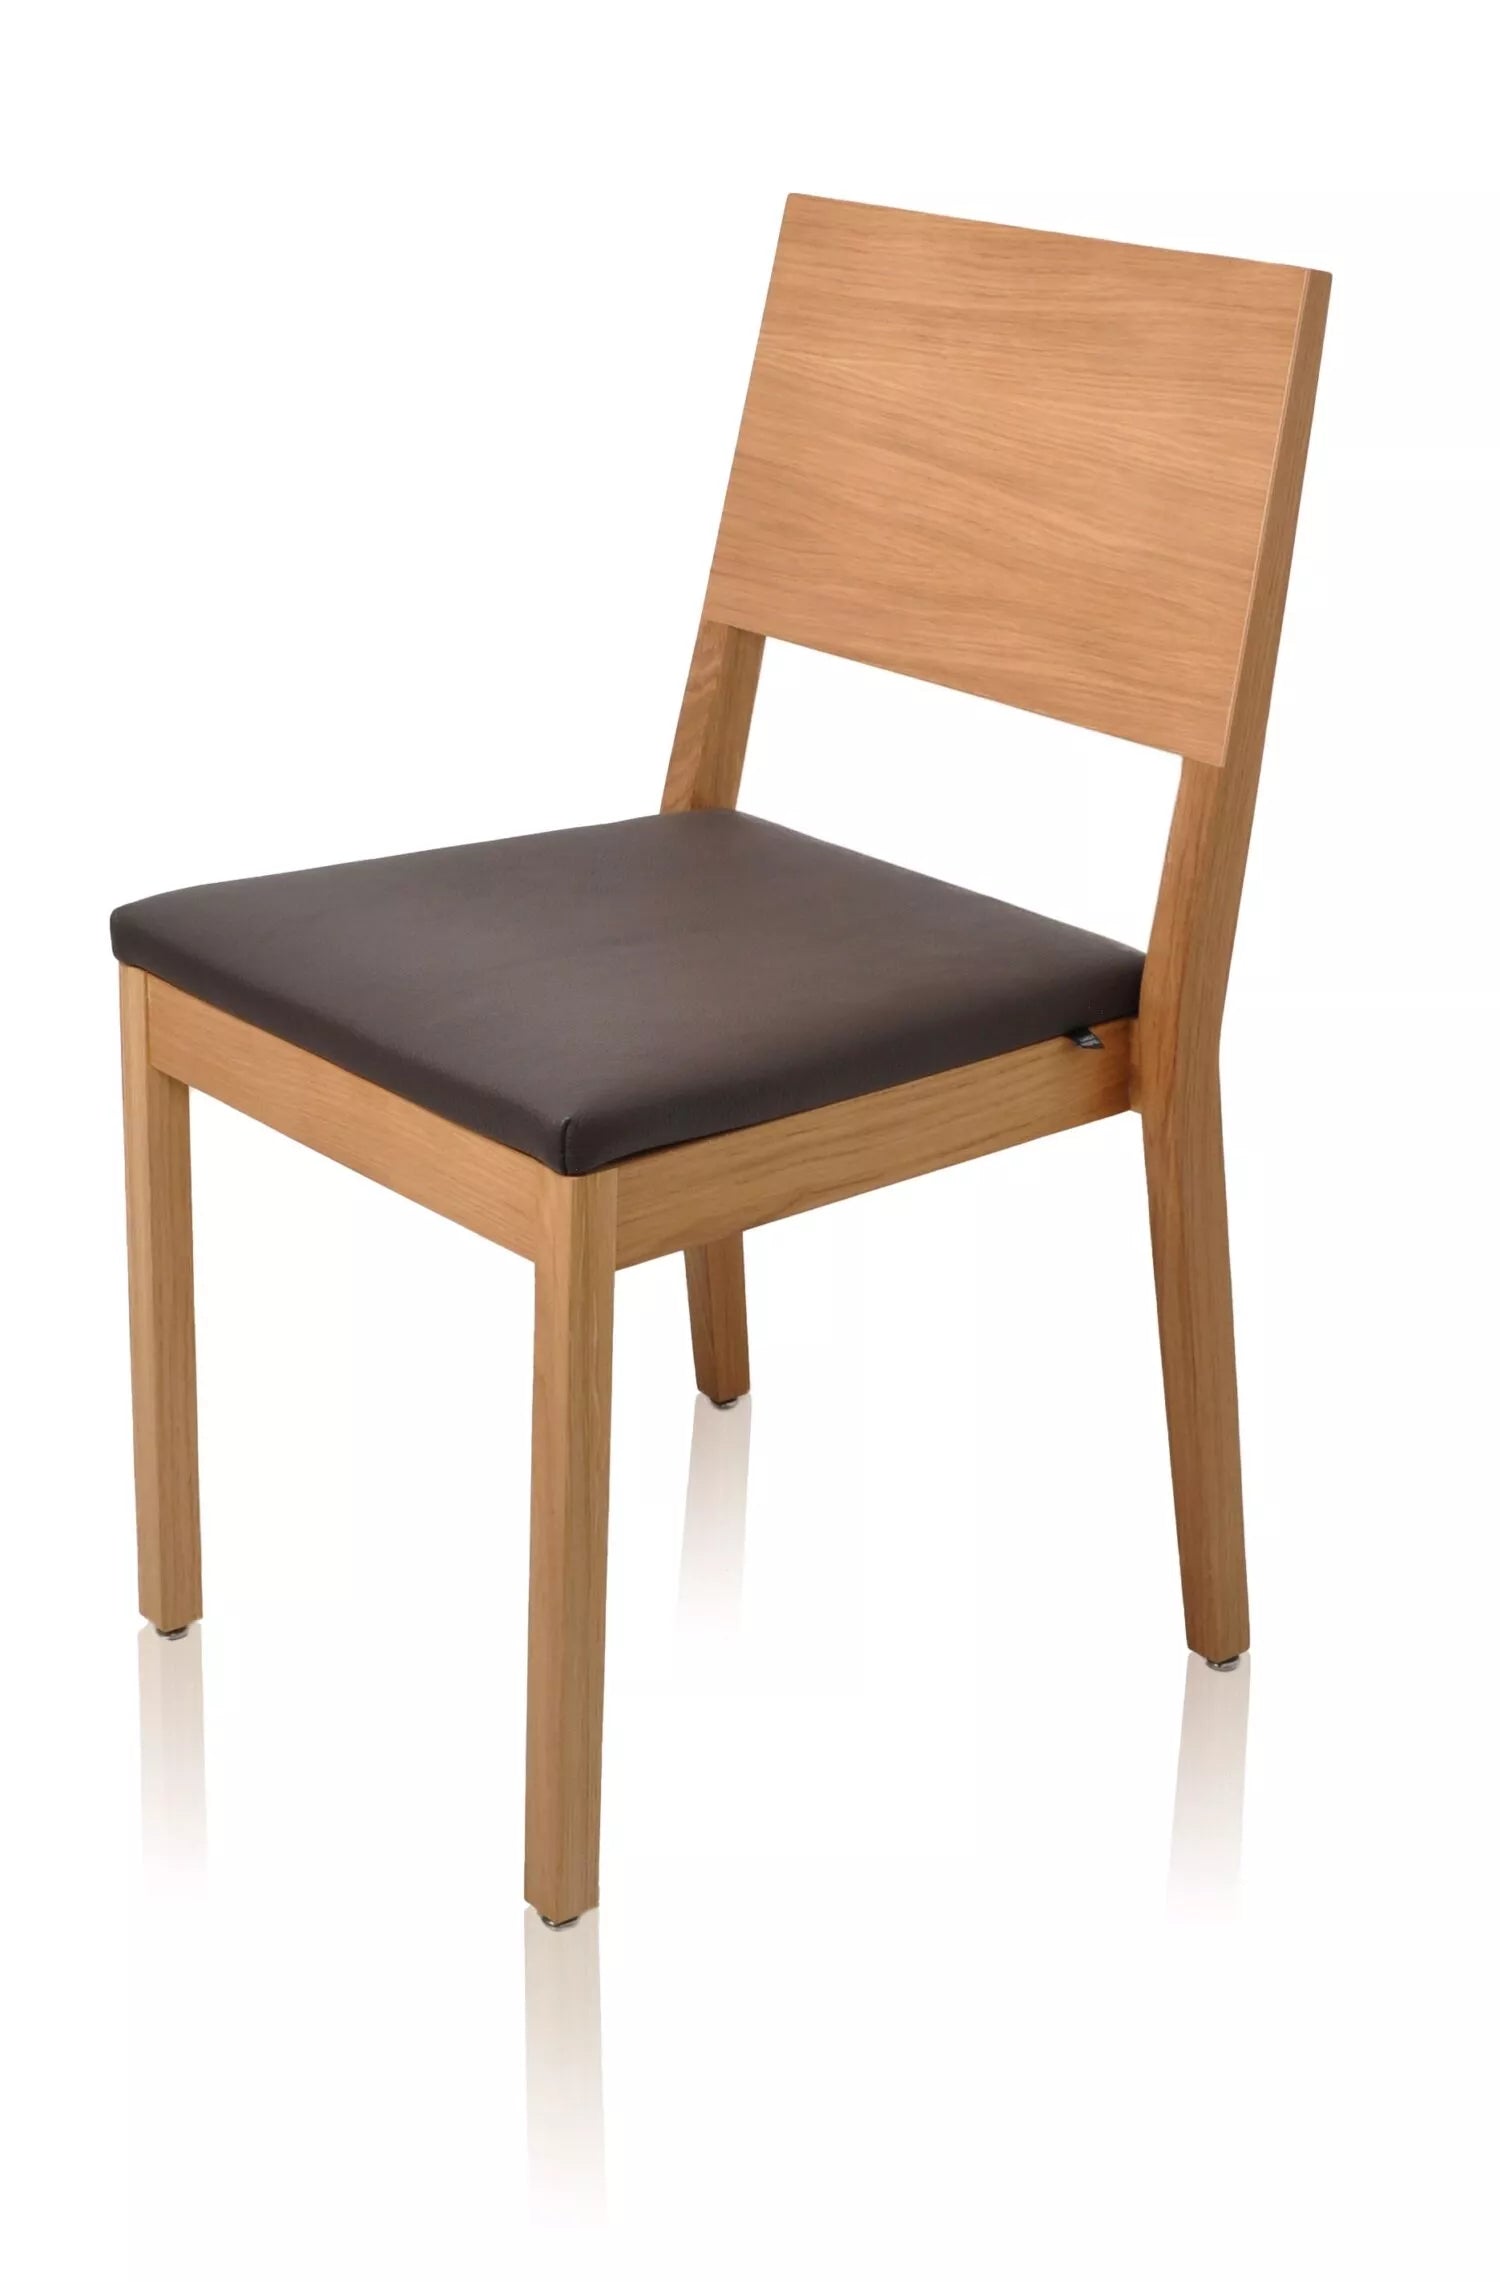 Lavabis classic stacking chair